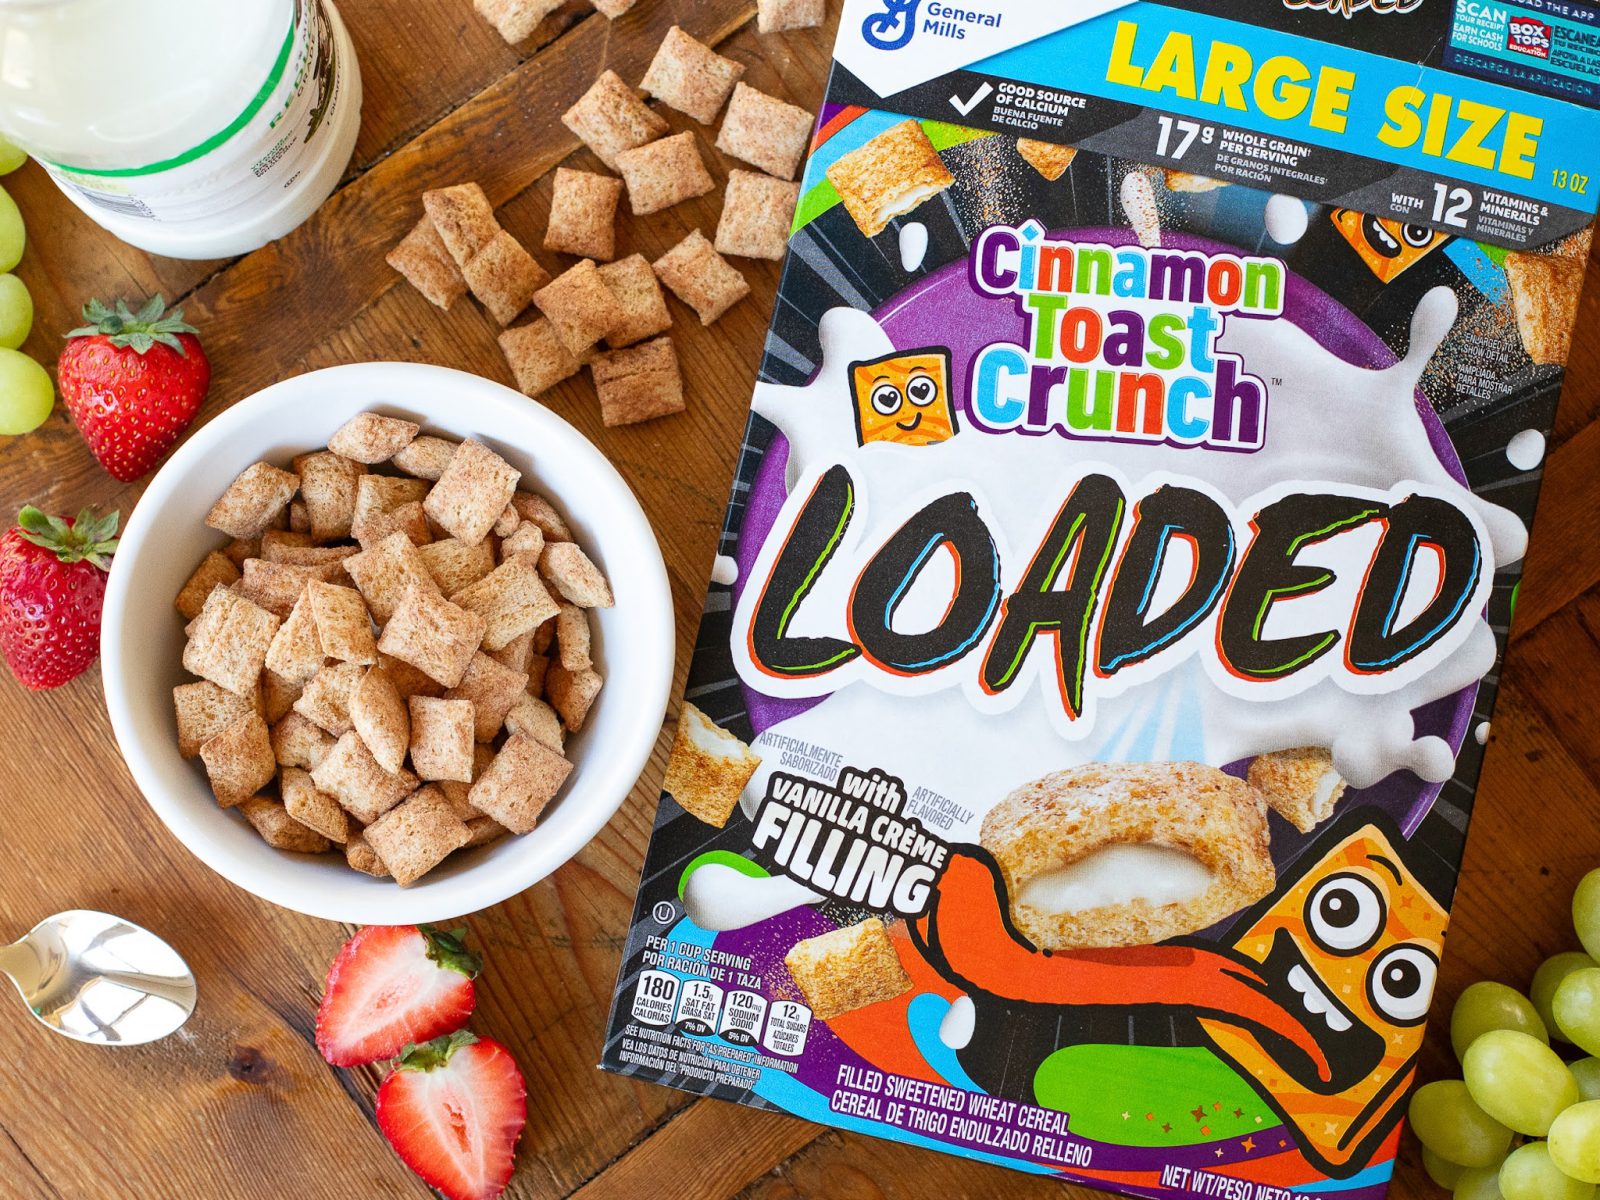 General Mills Loaded Cereal As Low As 90¢ At Kroger